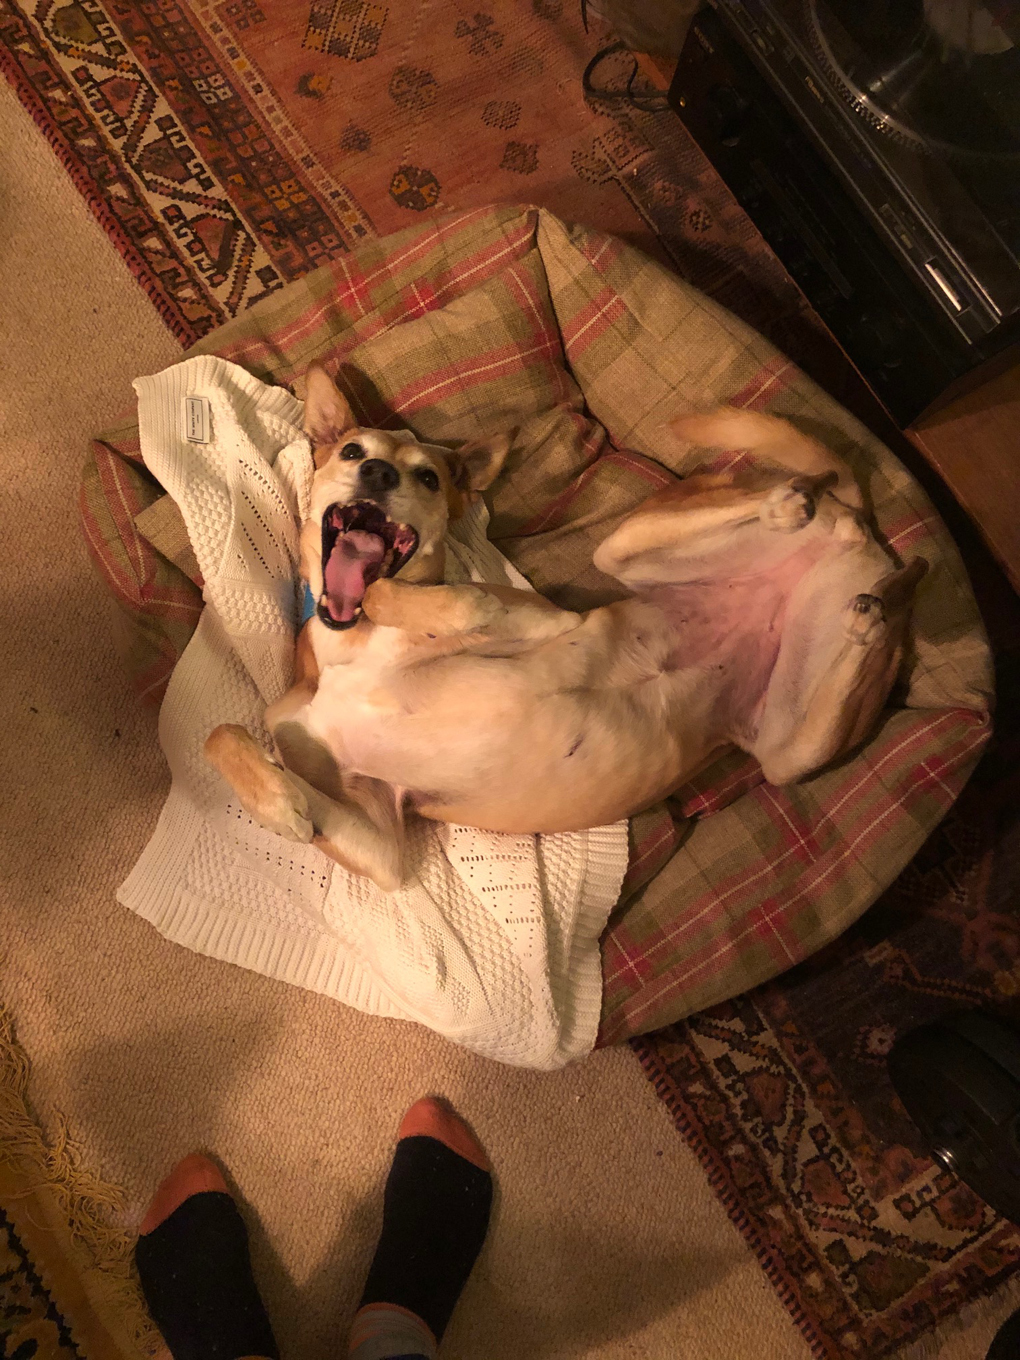 A happy looking dog lying on her back in a scruffy dog bed